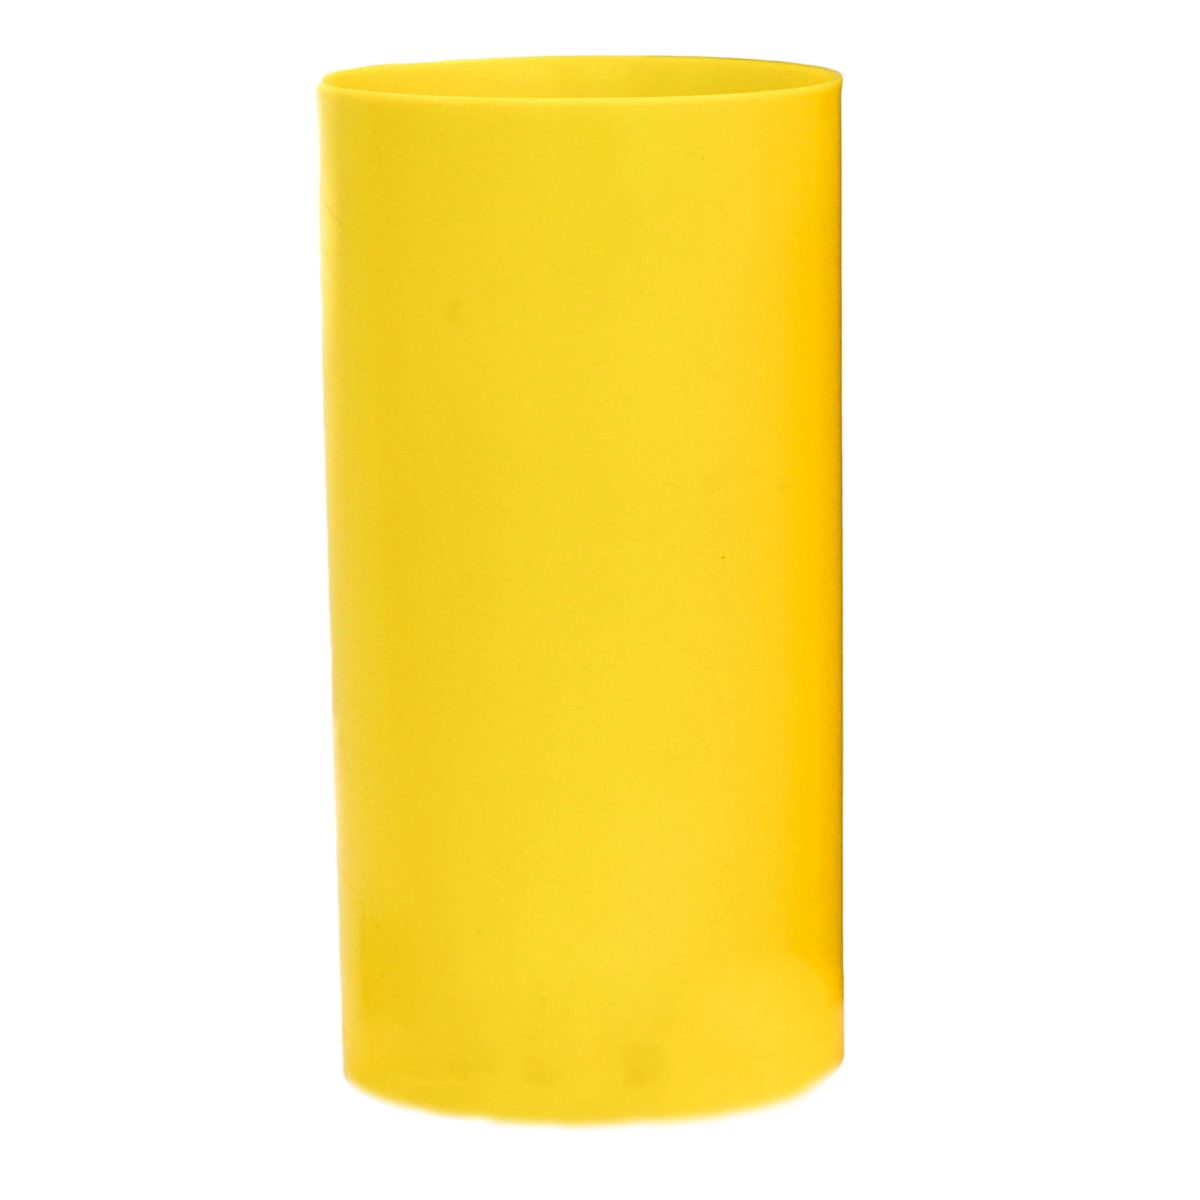 Paragon 6-inch Yellow Cylinder Mold